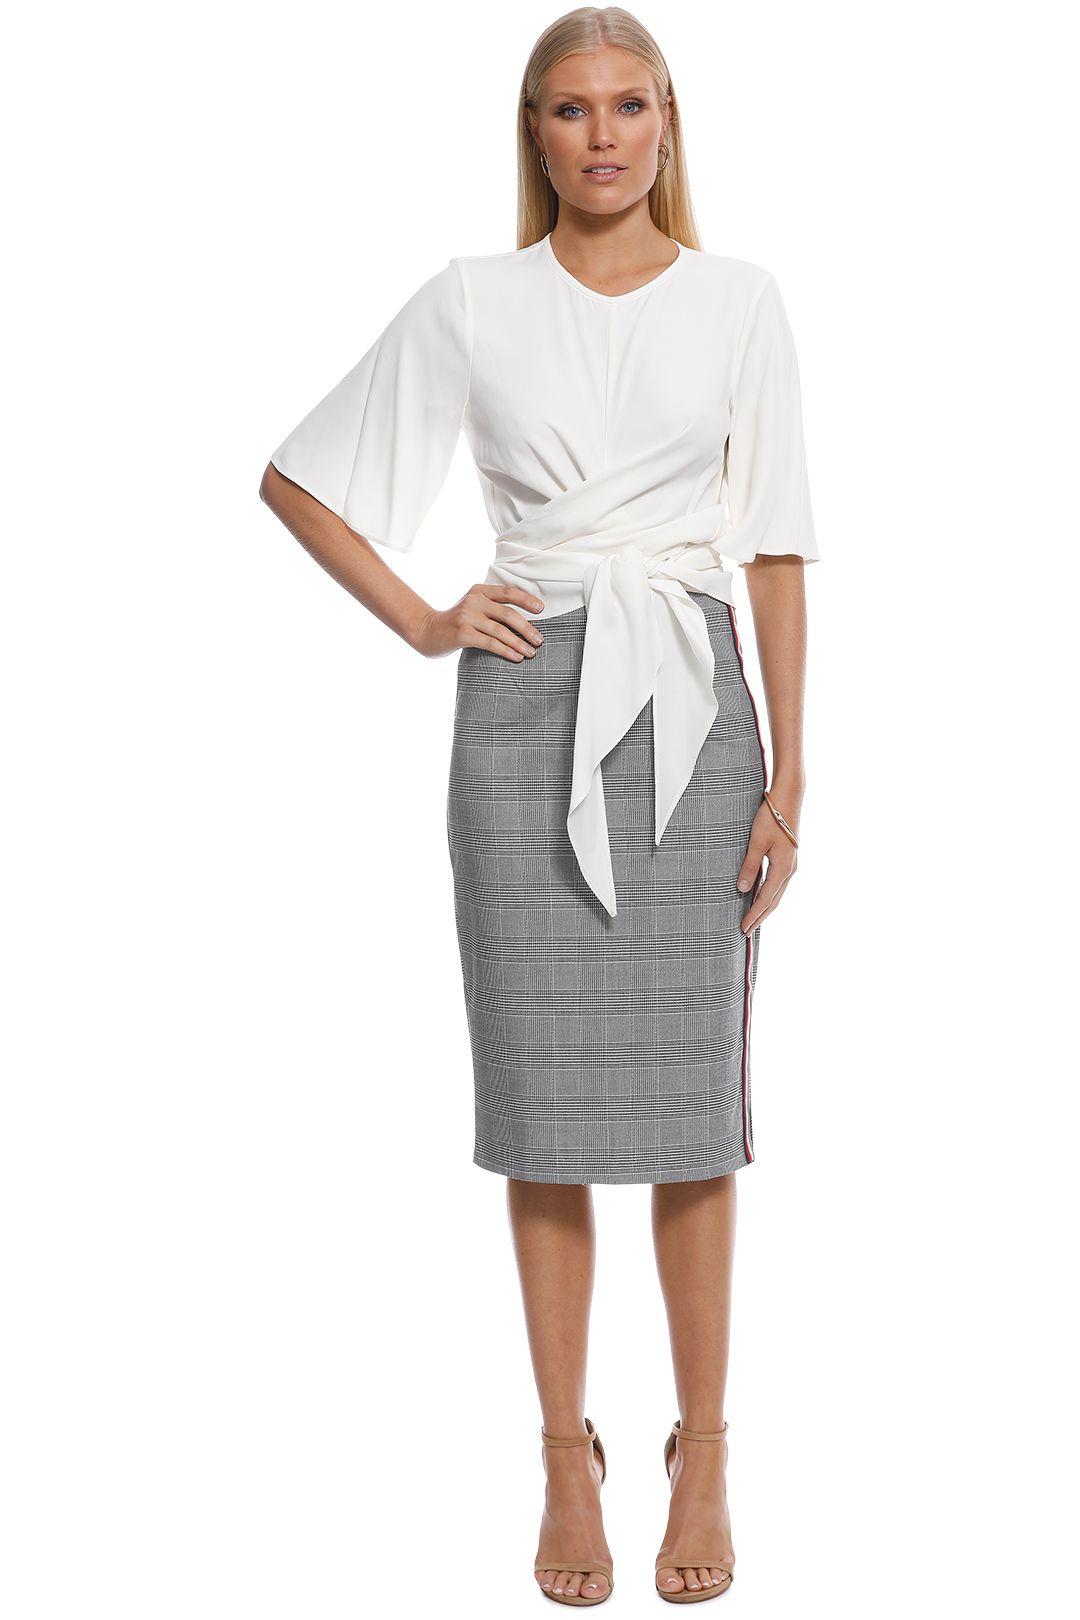 MNG - Boat Decorative Trim Skirt - Grey - Front